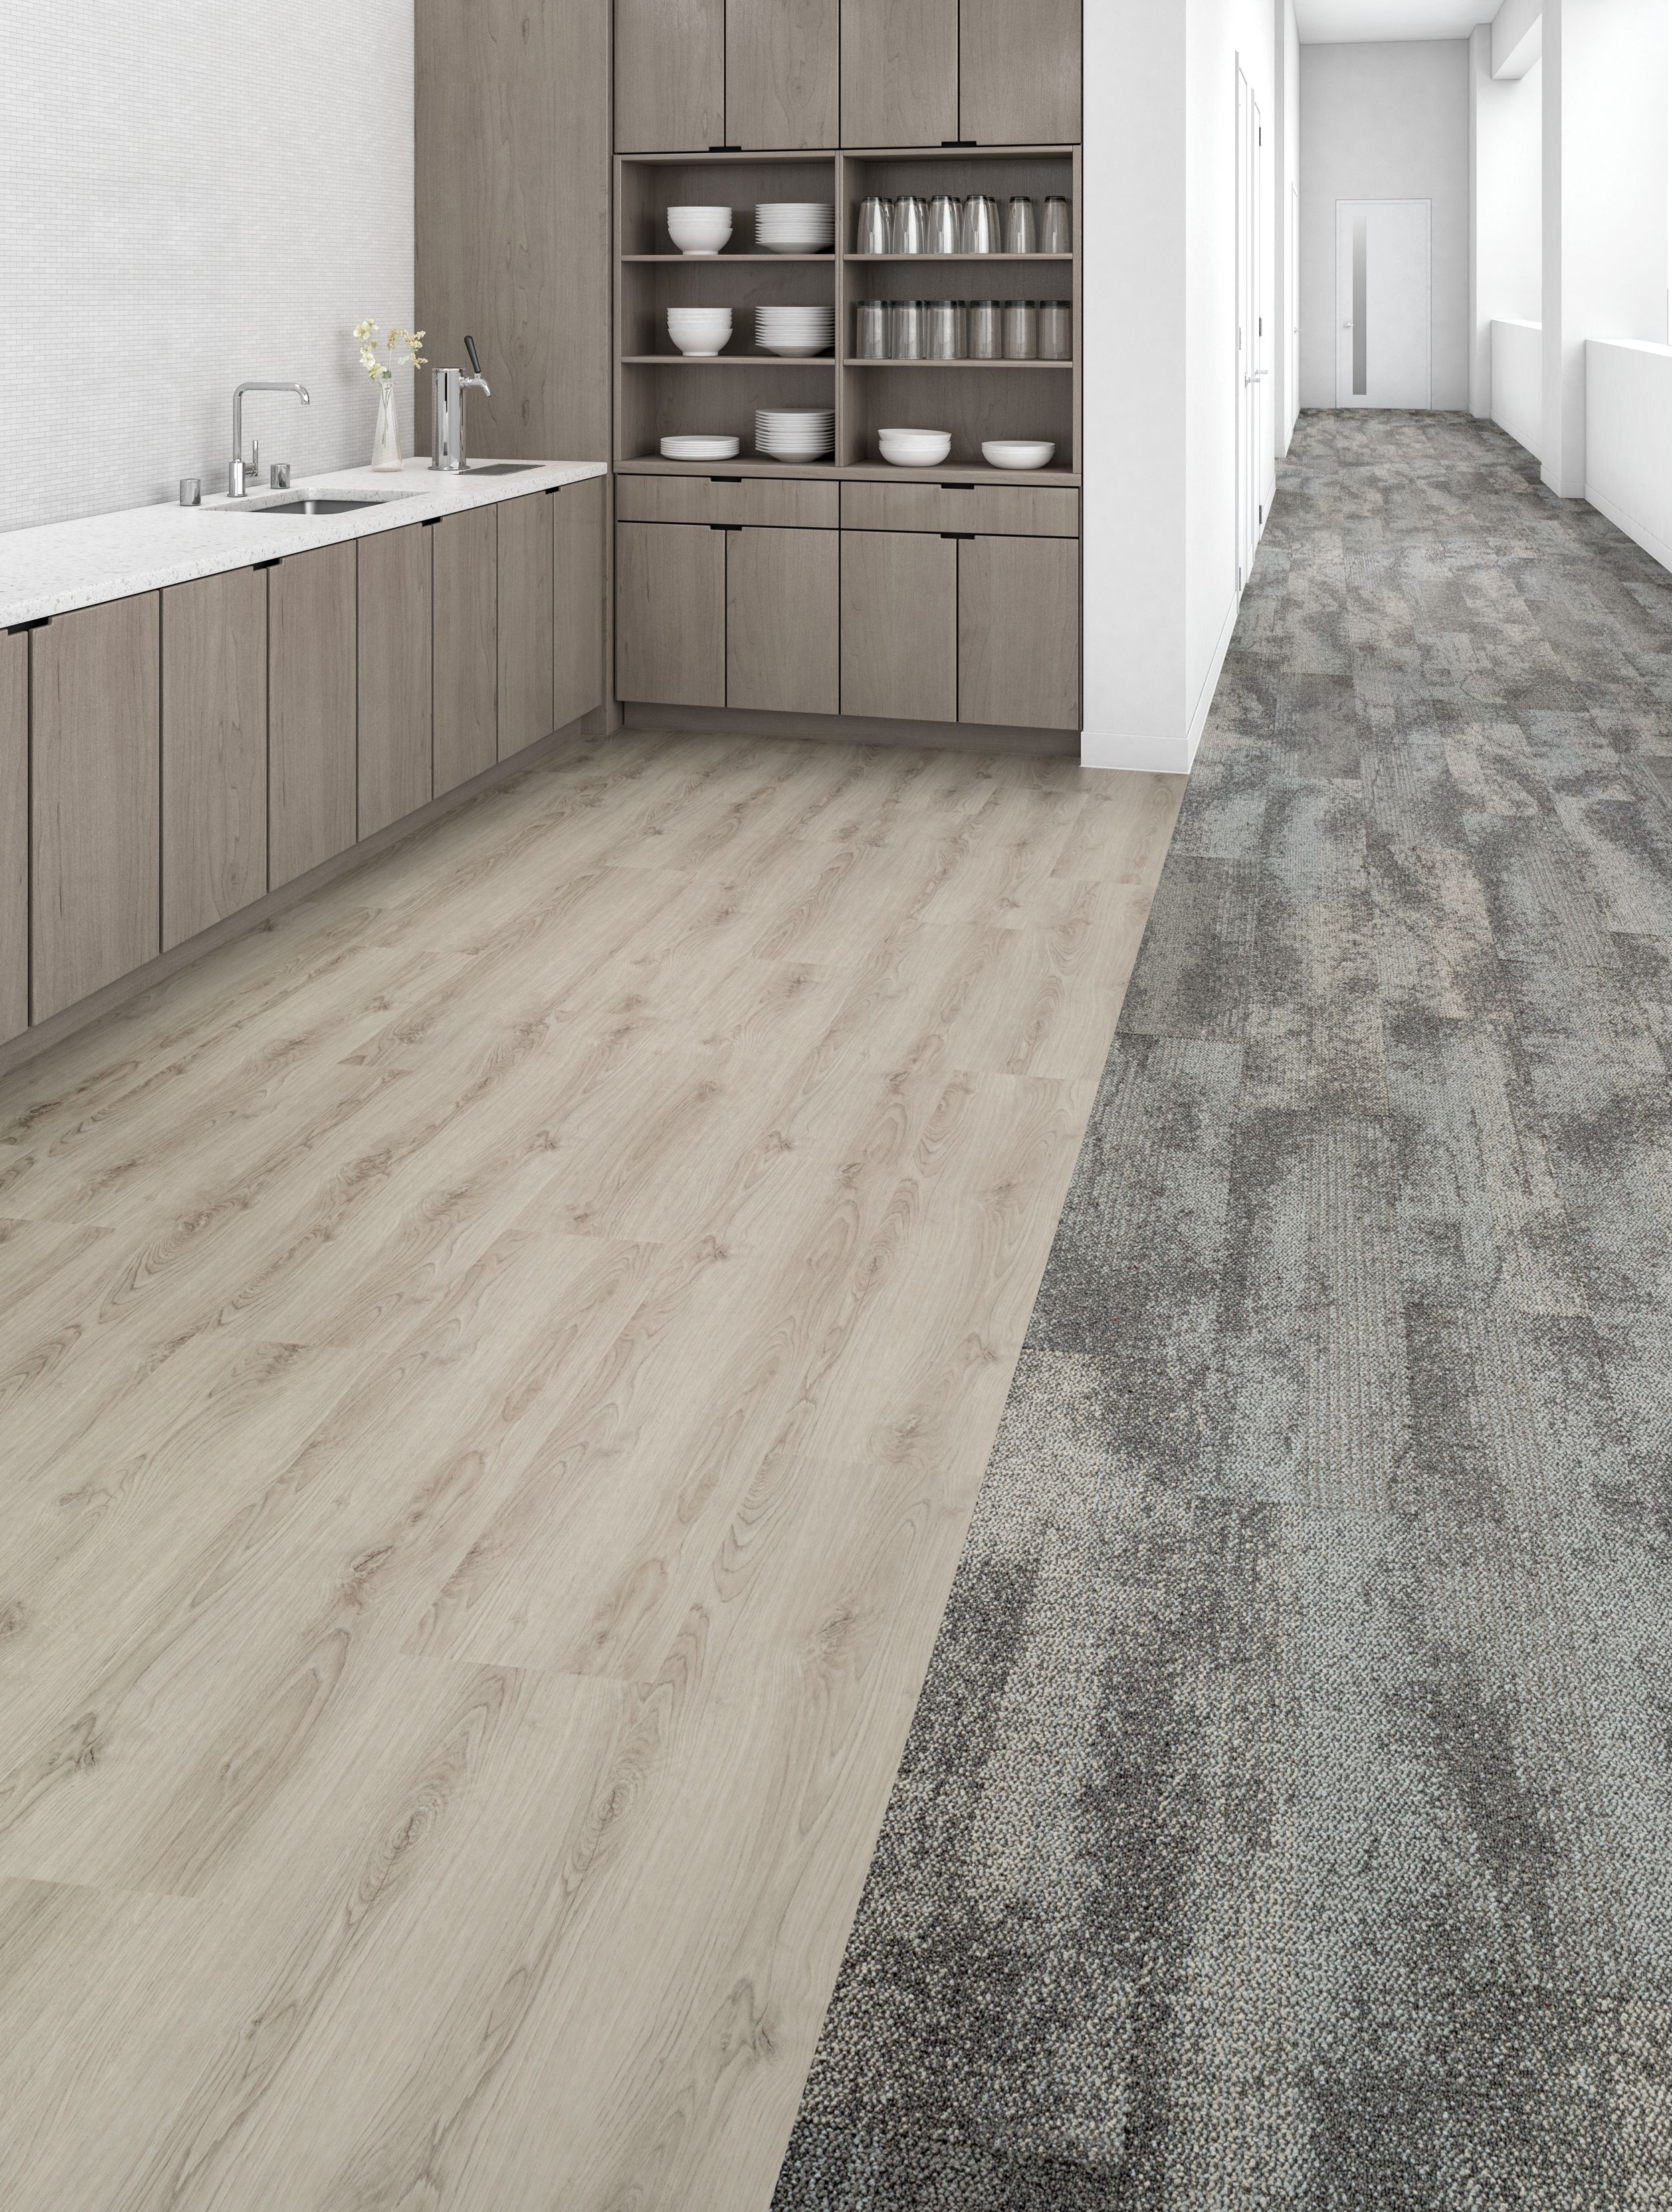 Interface Neighborhood Smooth and Natural Woodgrains LVT in kitchen area with sink imagen número 4